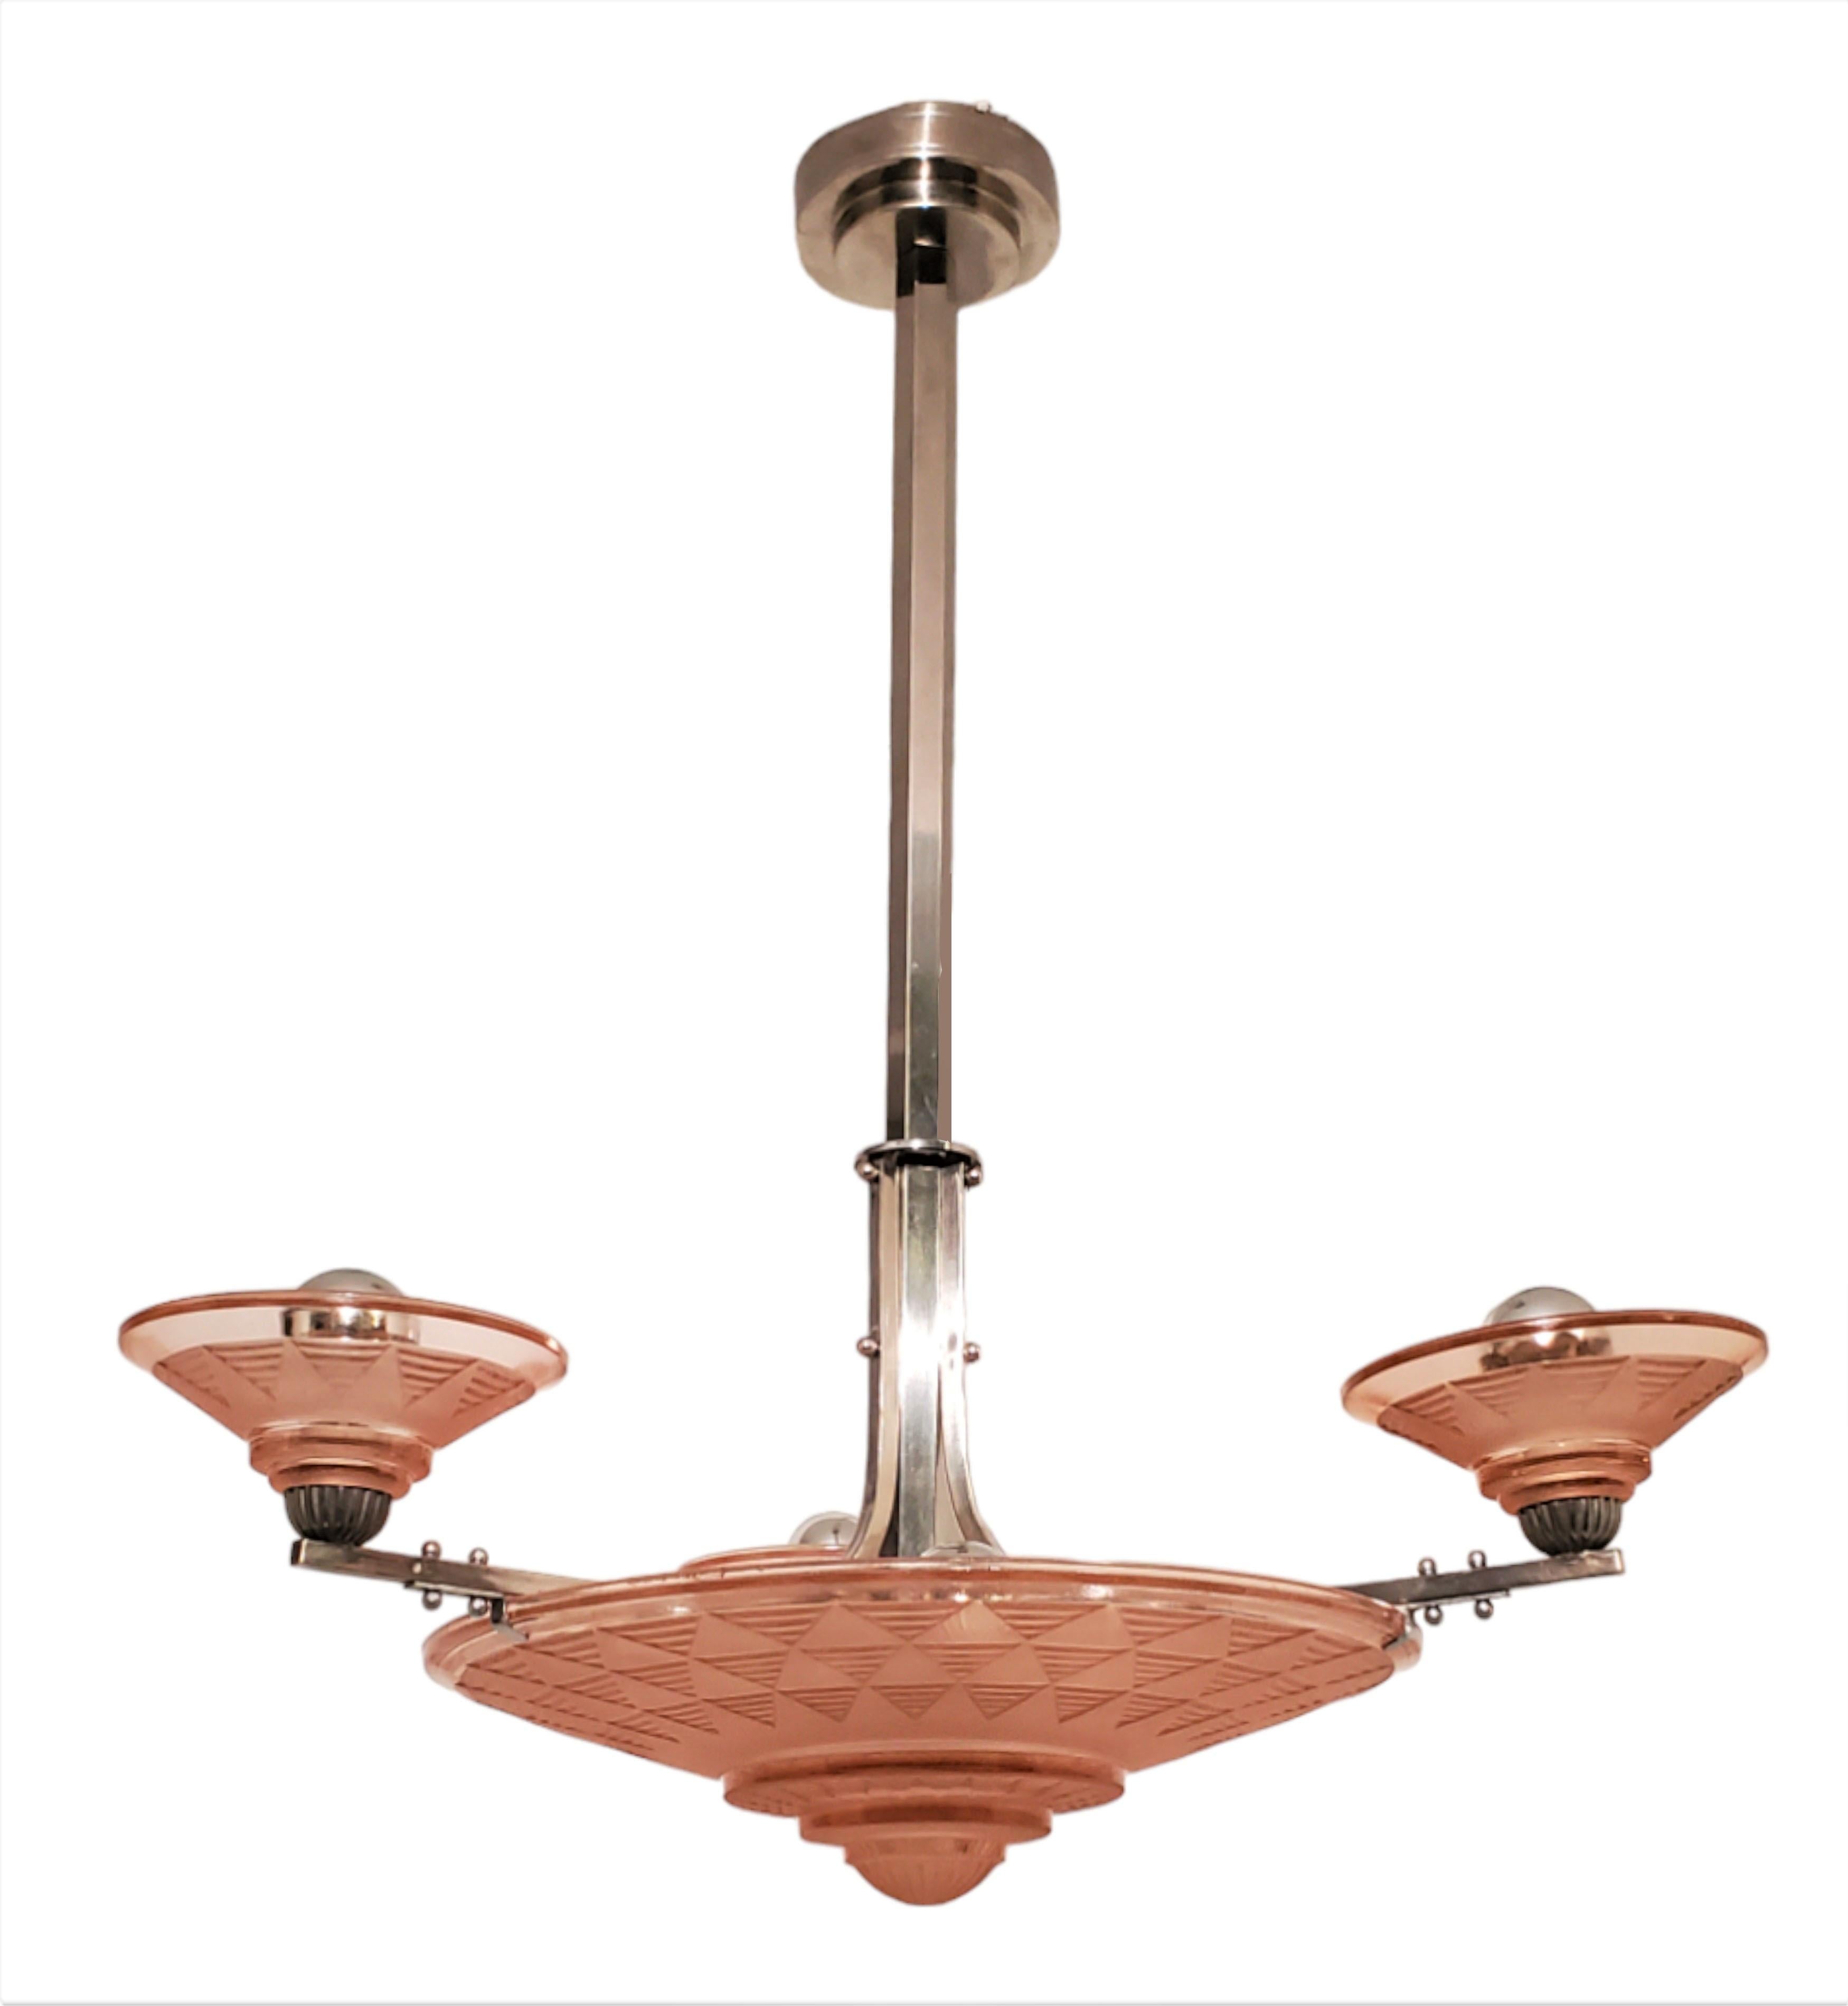 Petitot Art Deco peach /salmon /pink frosted glass + nickeled bronze chandelier For Sale 9